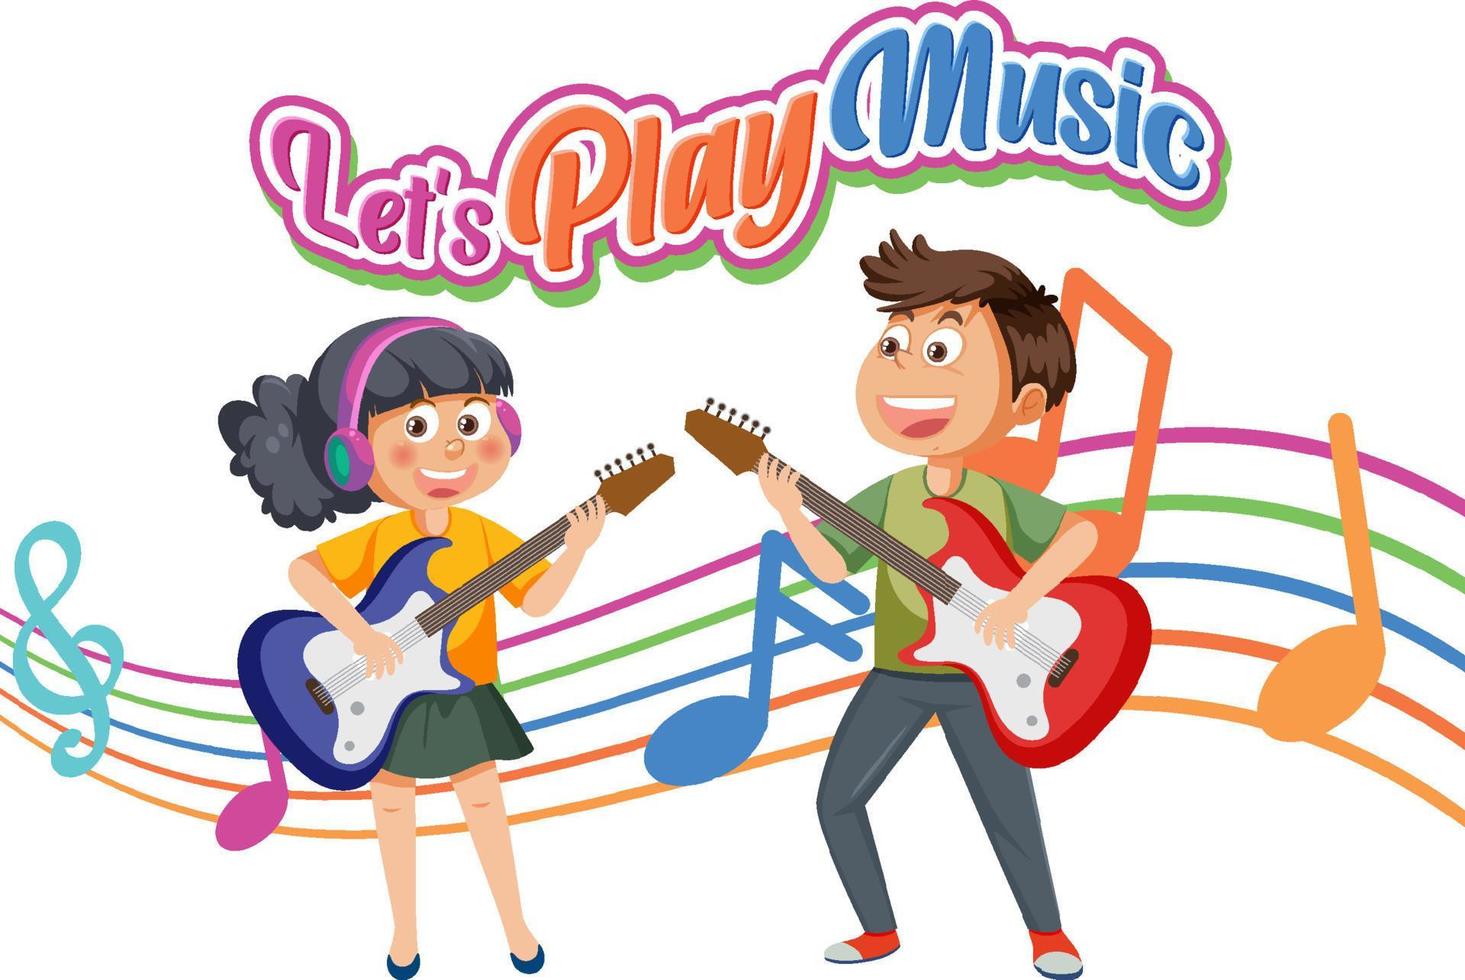 Lets play music text with children playing musical instrument vector